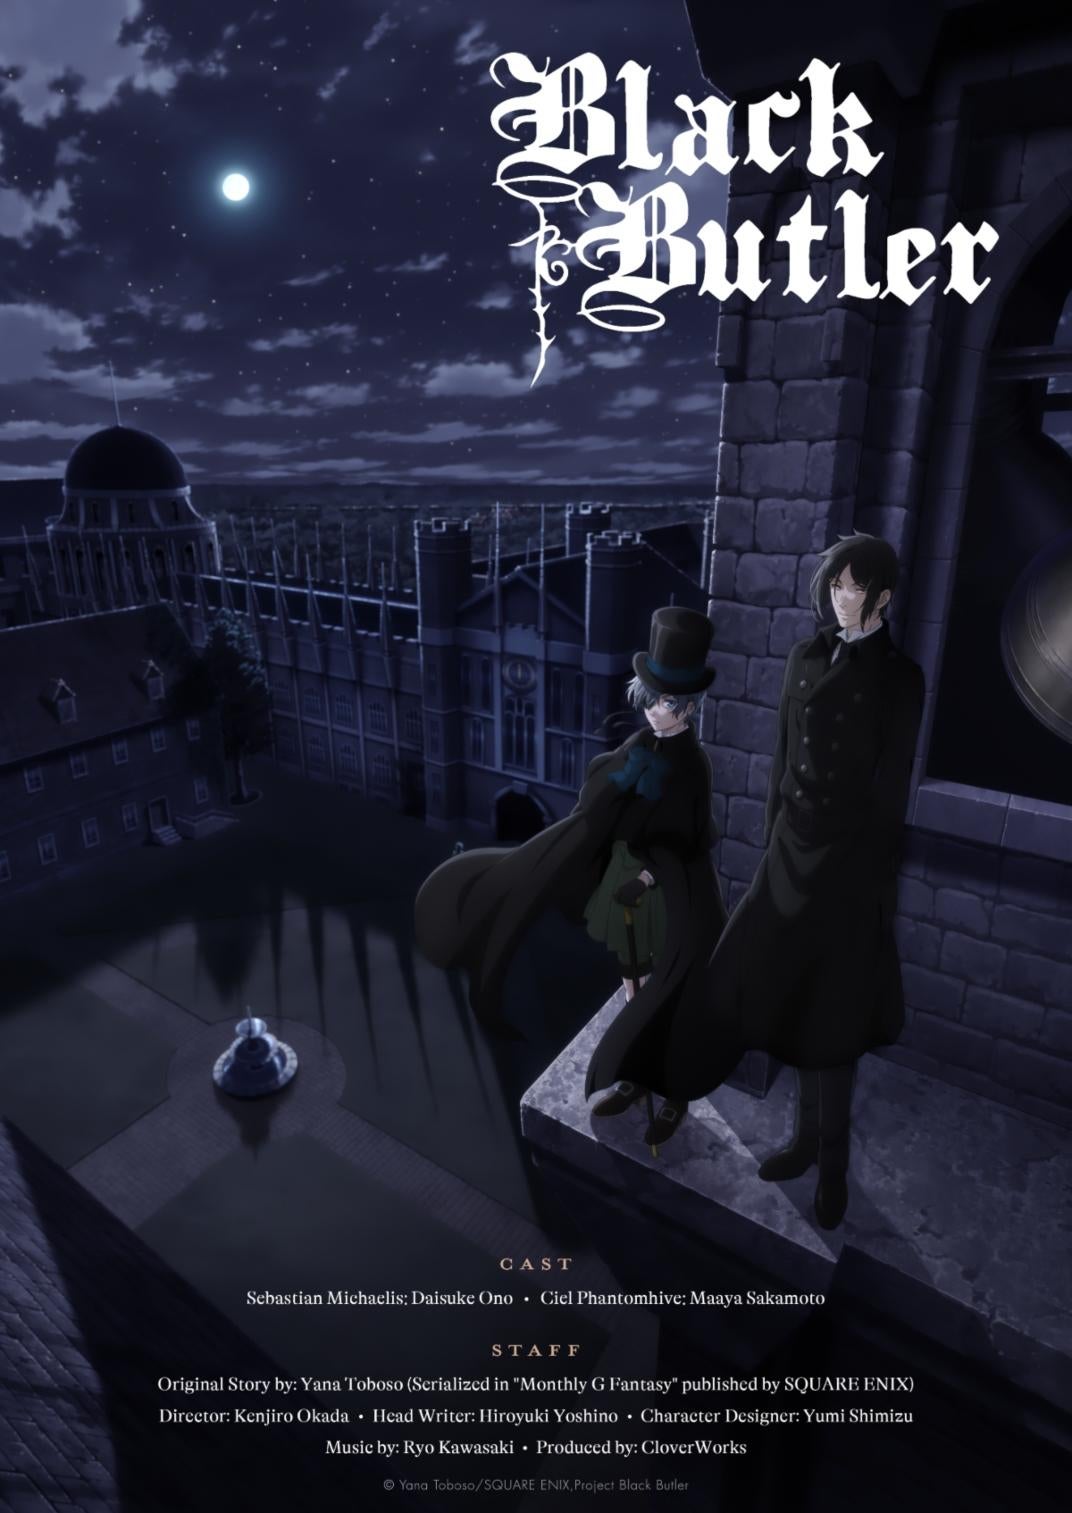 The Dark Gender Politics of 'Black Butler' Are The Secret To Its Success |  iwantedwings